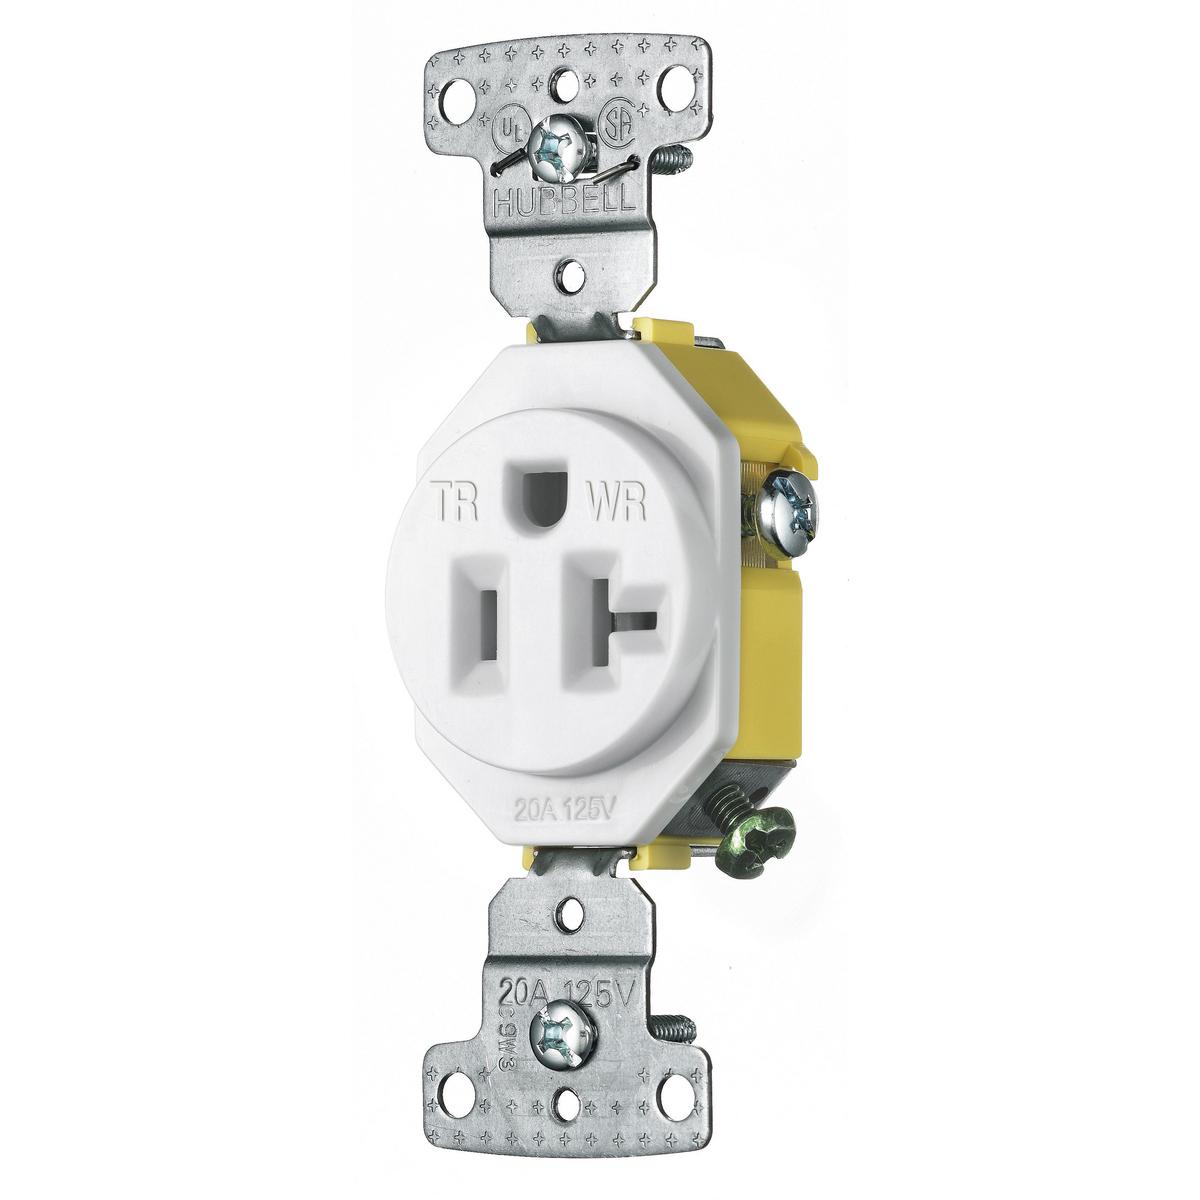 Hubbell RR201WWRTR TradeSelect, Straight Blade Devices, Residential Grade, Receptacles, Weather and Tamper Resistant Single, 20A 125V, 2-Pole 3-Wire Grounding, 5-20R, Self Grounding, White  ; Smooth indented face appearance ; Multiple-drive Slot/Phillips/Robertson head scre